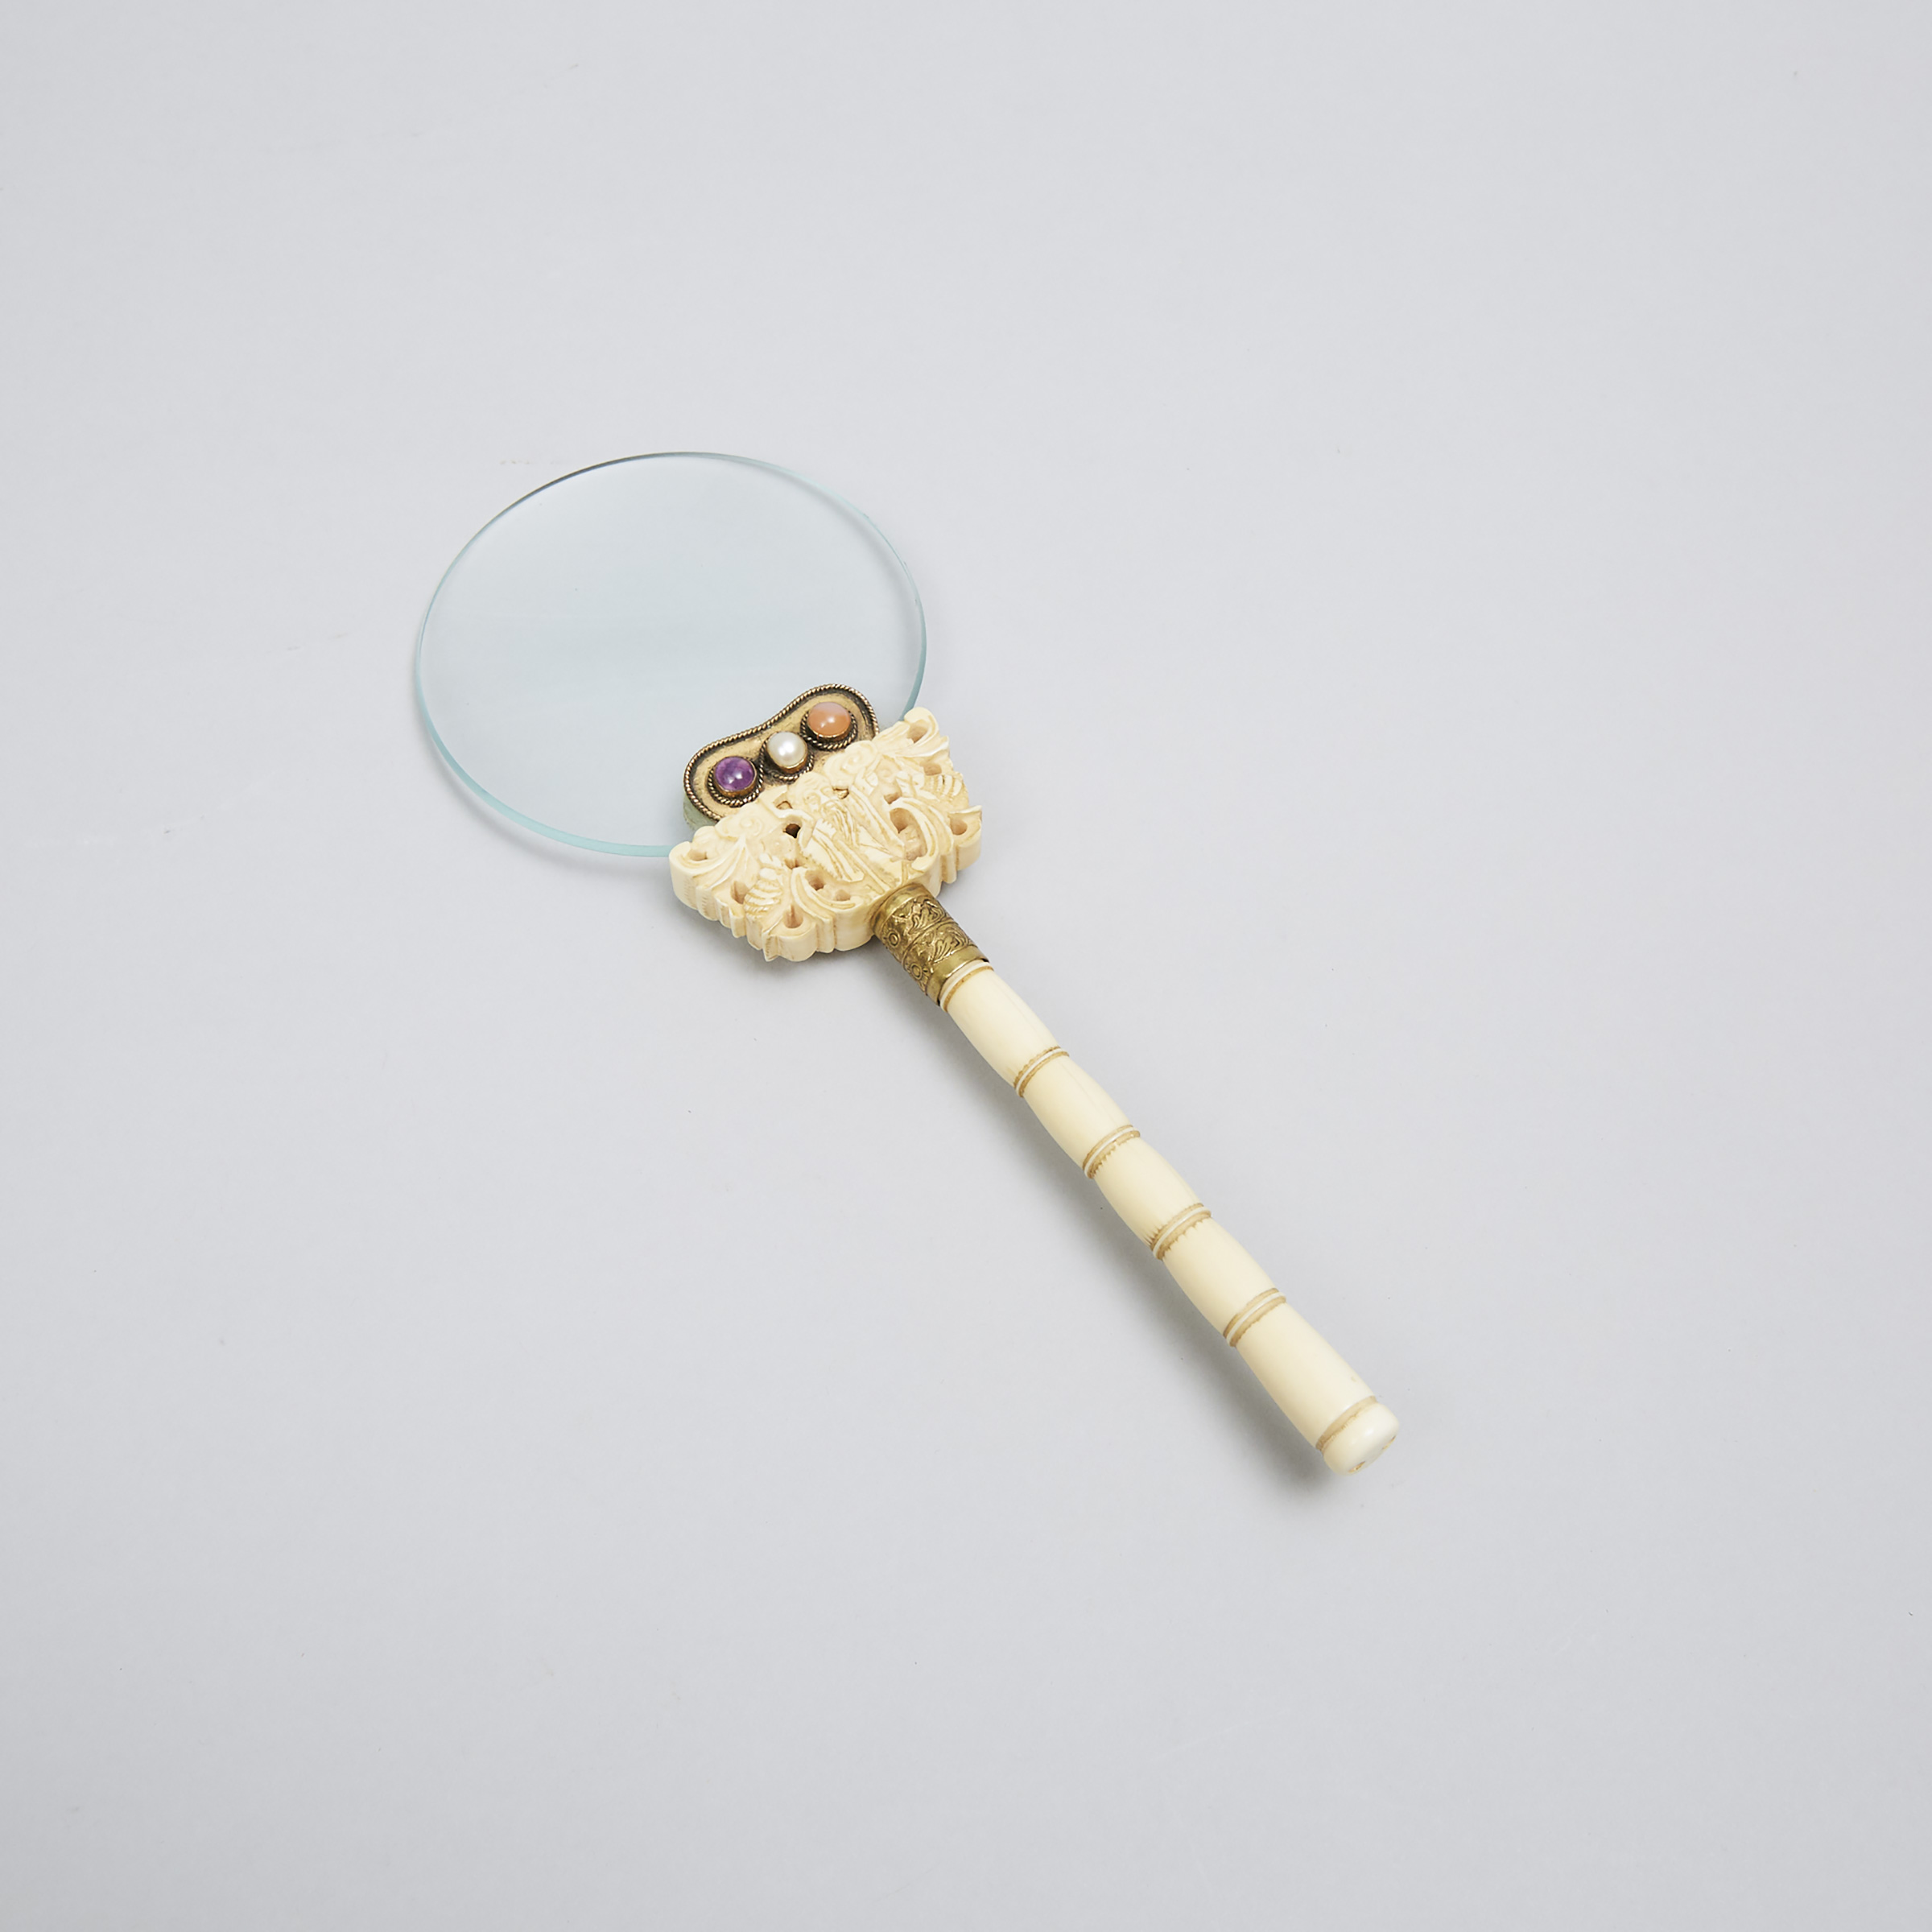 Chinese Turned and Carved Ivory Magnifying Glass, early 20th century